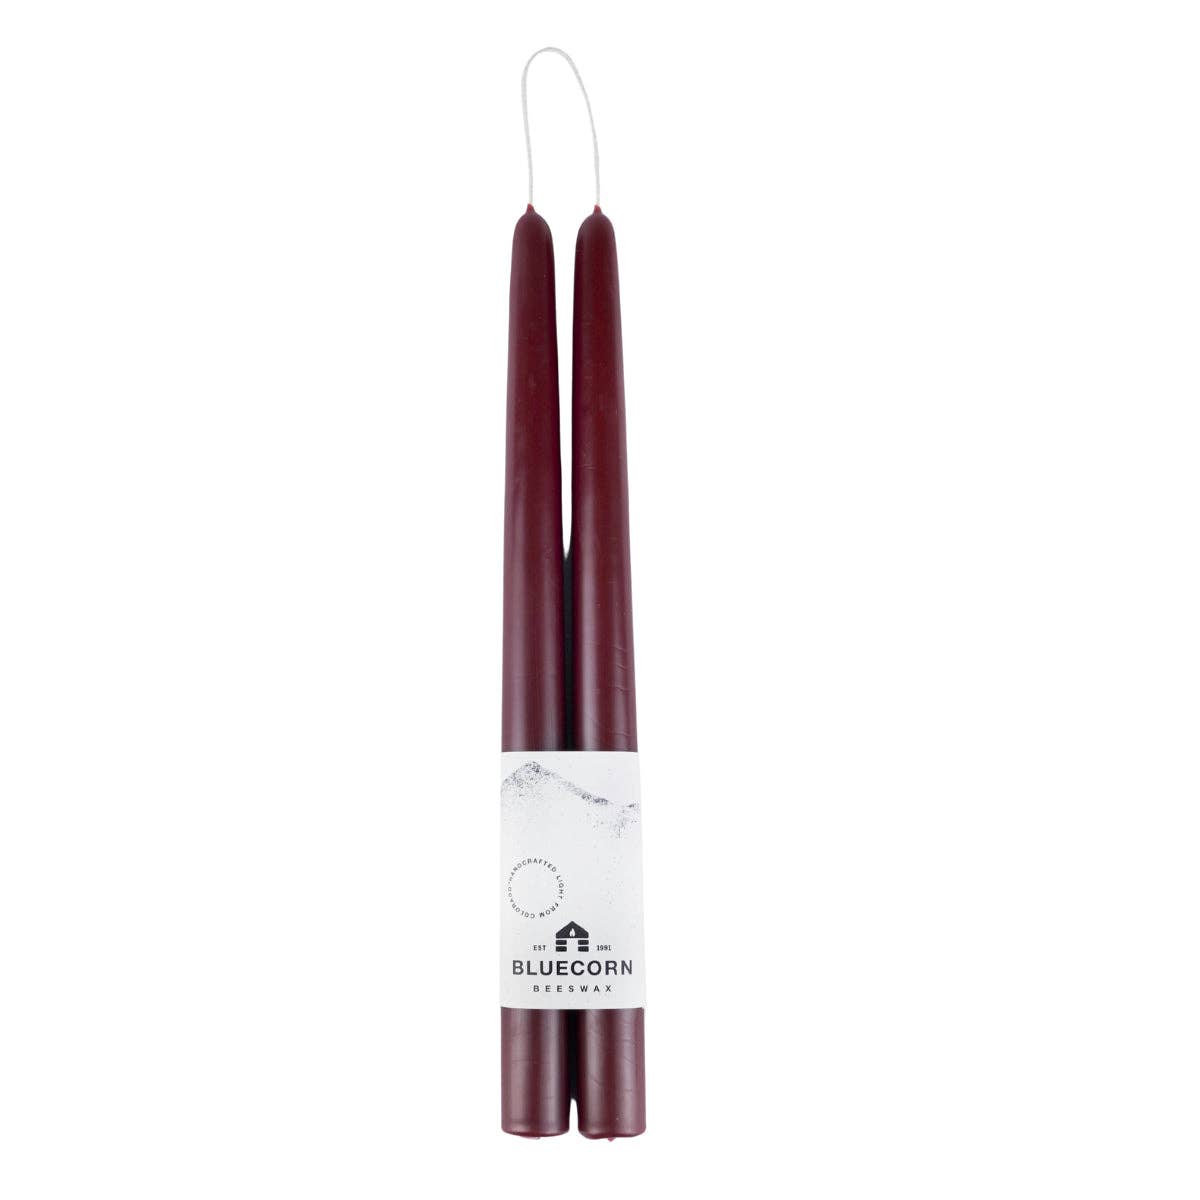 Pair of Hand-Dipped Beeswax Taper Candles: 8"